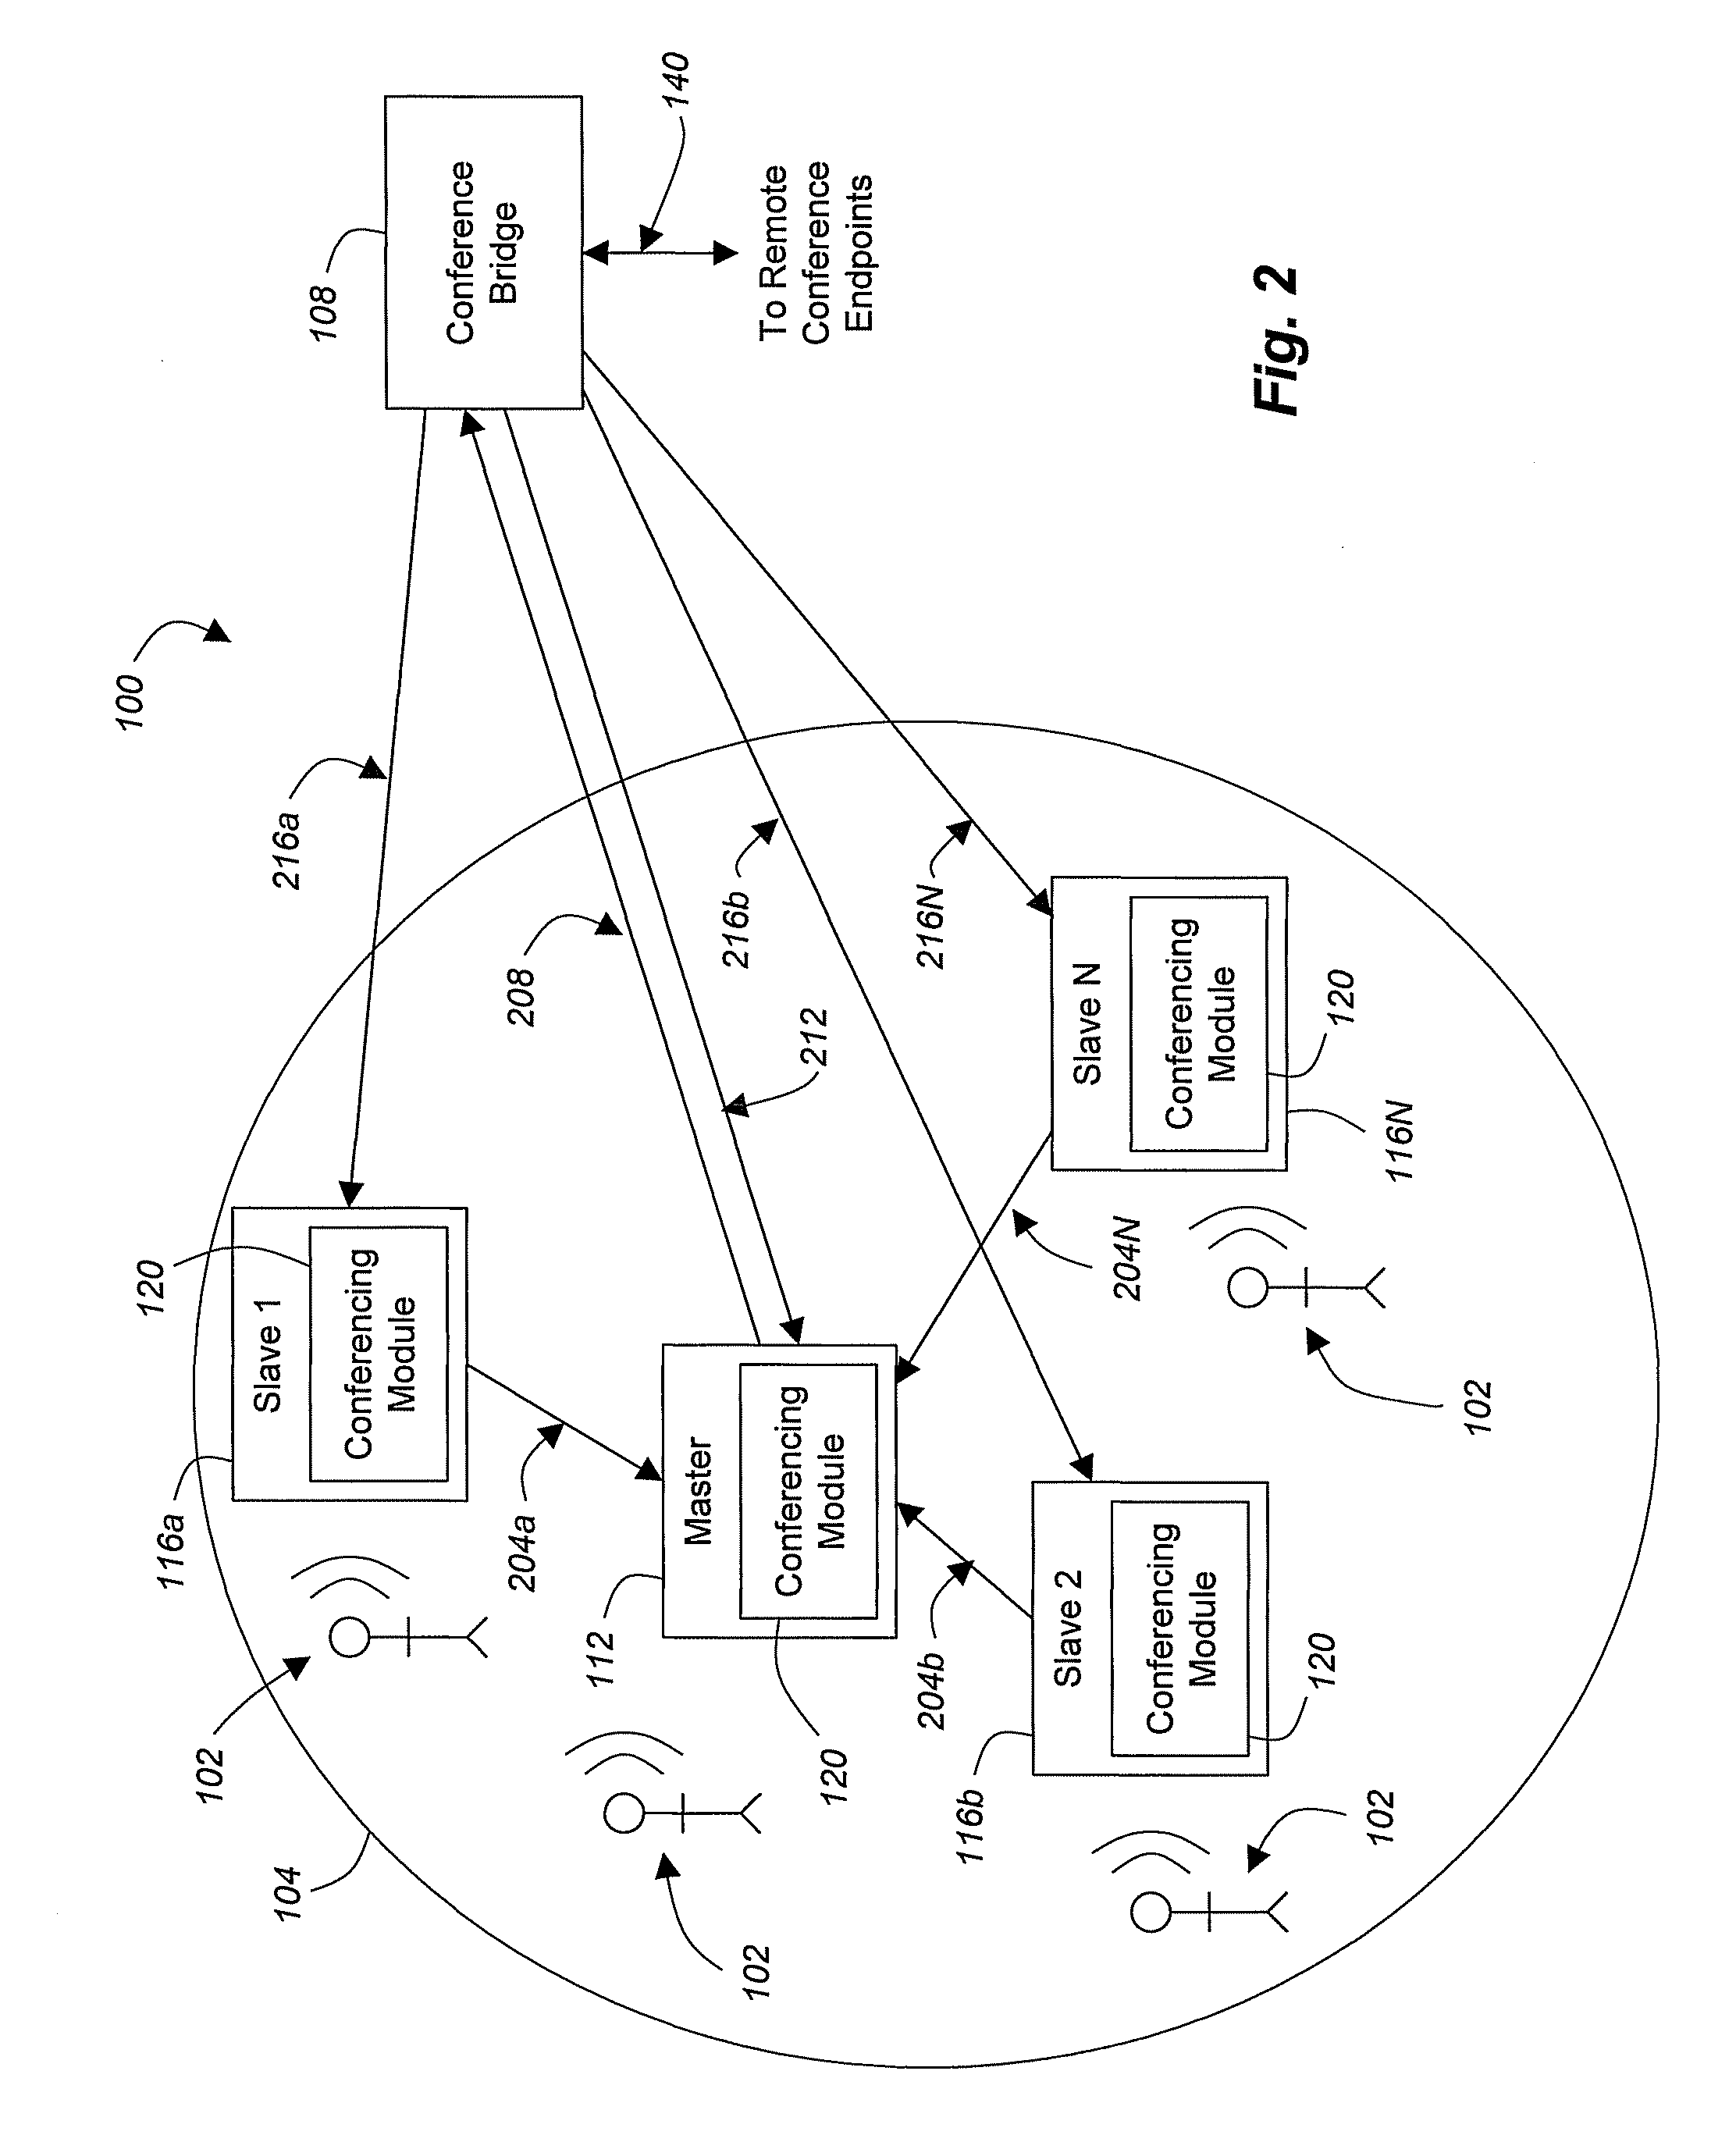 System and method of synchronizing multiple microphone and speaker-equipped devices to create a conferenced area network